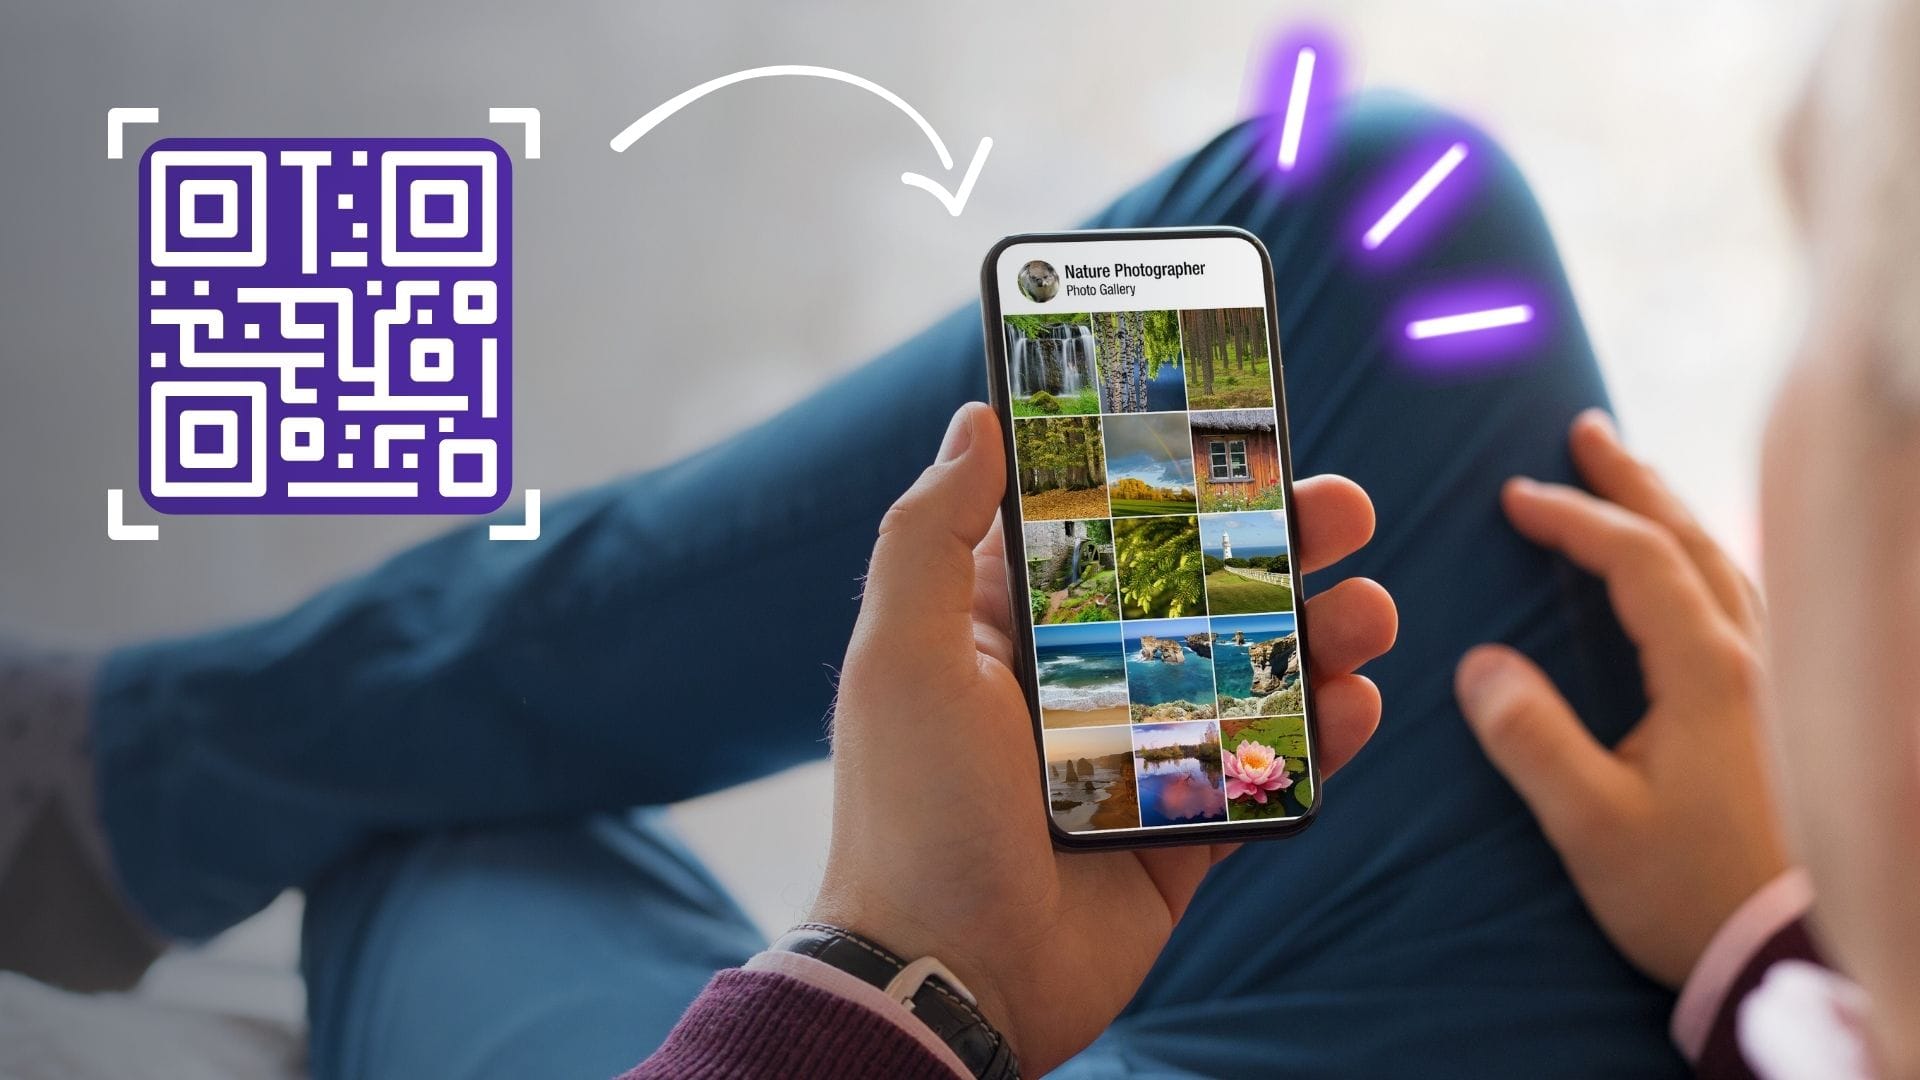 Use a micro qr code to allow people to scan and navigate directly to your image gallery.